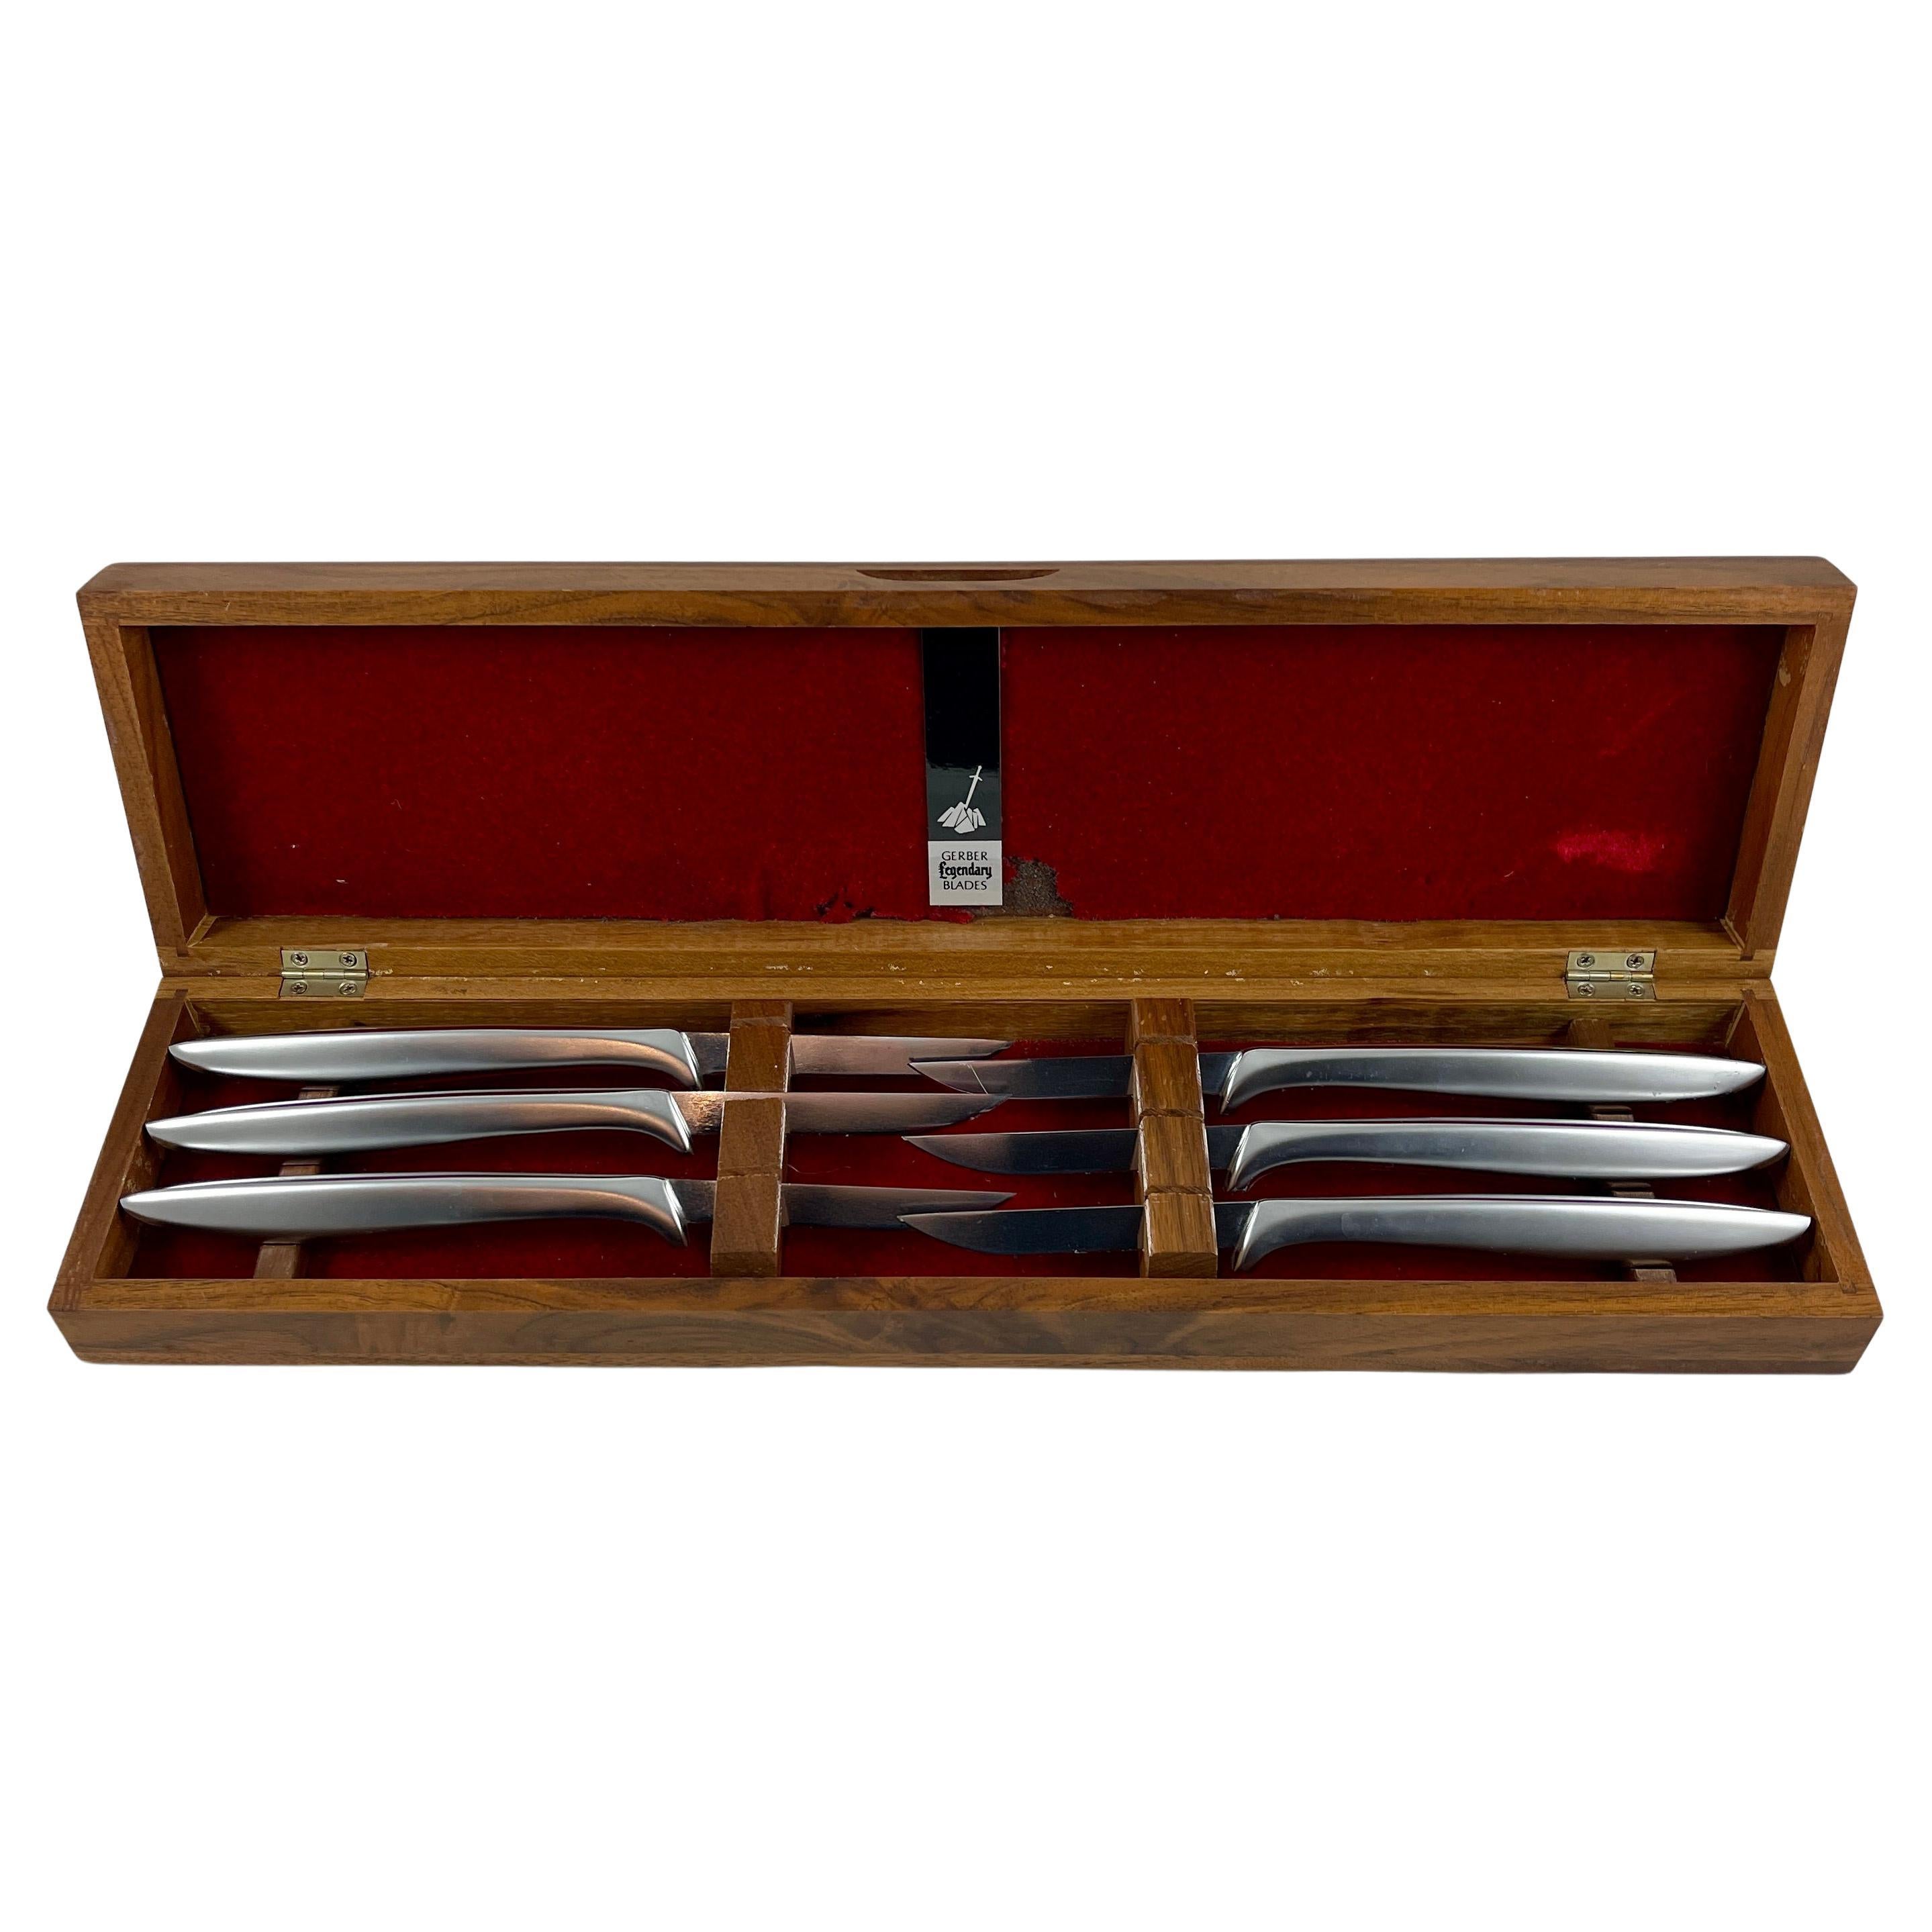 Mid-Century Gerber Miming Steak Knives in Fitted Walnut Box, S/6